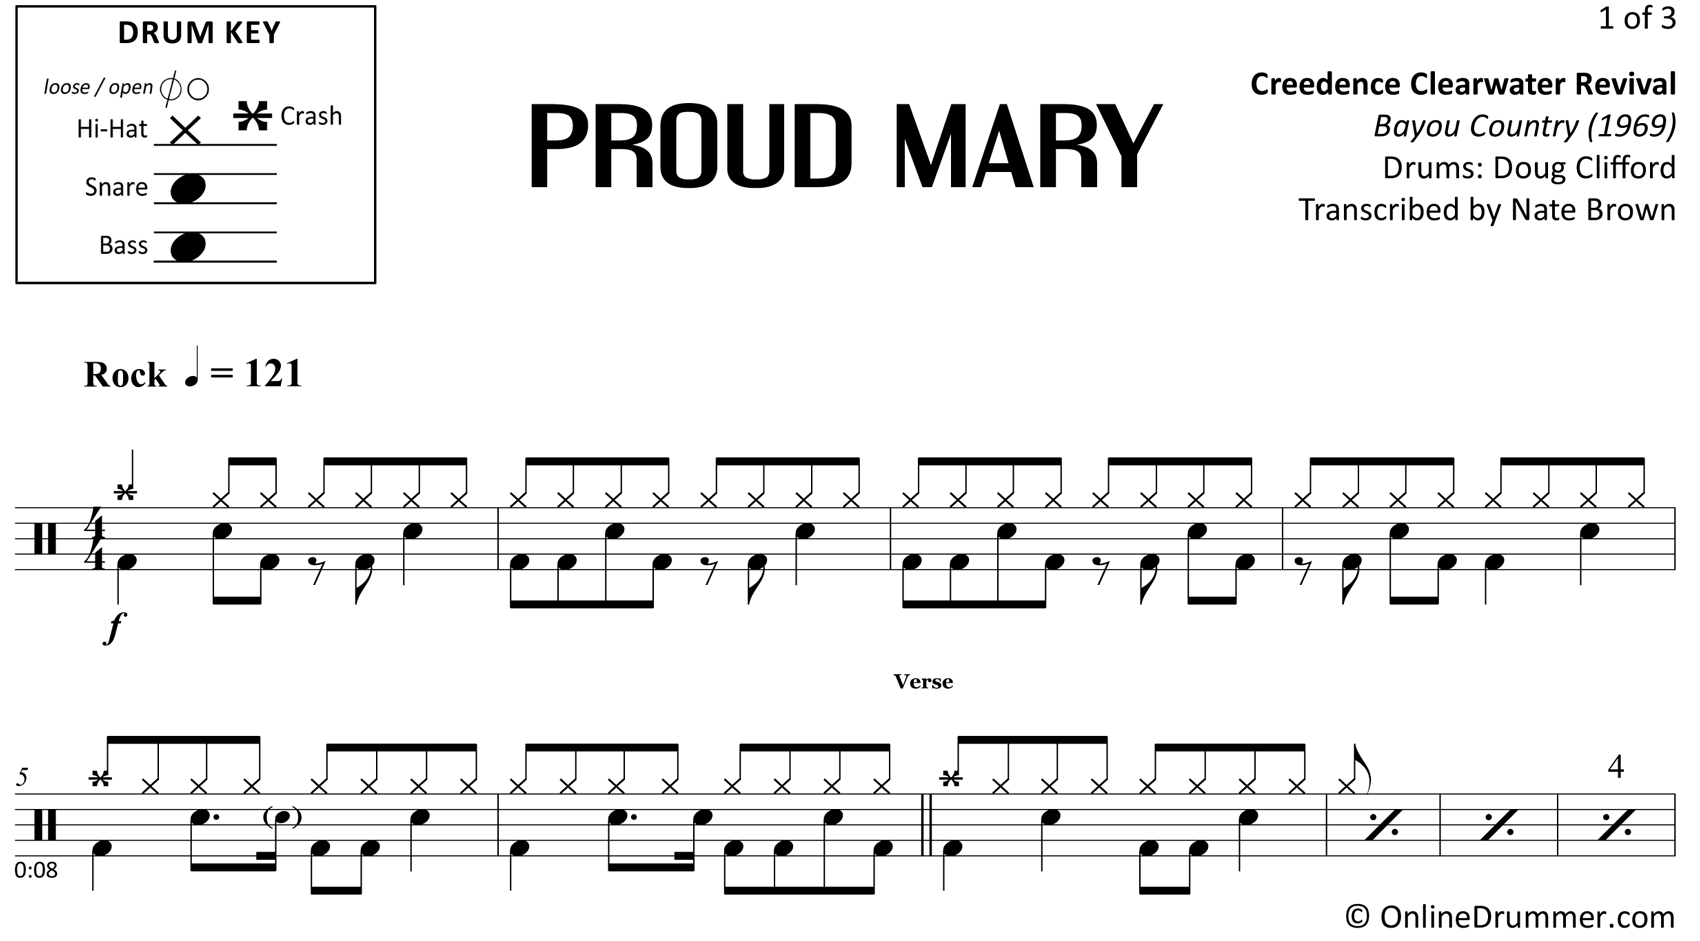 Proud Mary - Creedence Clearwater Revival - Drum Sheet Music